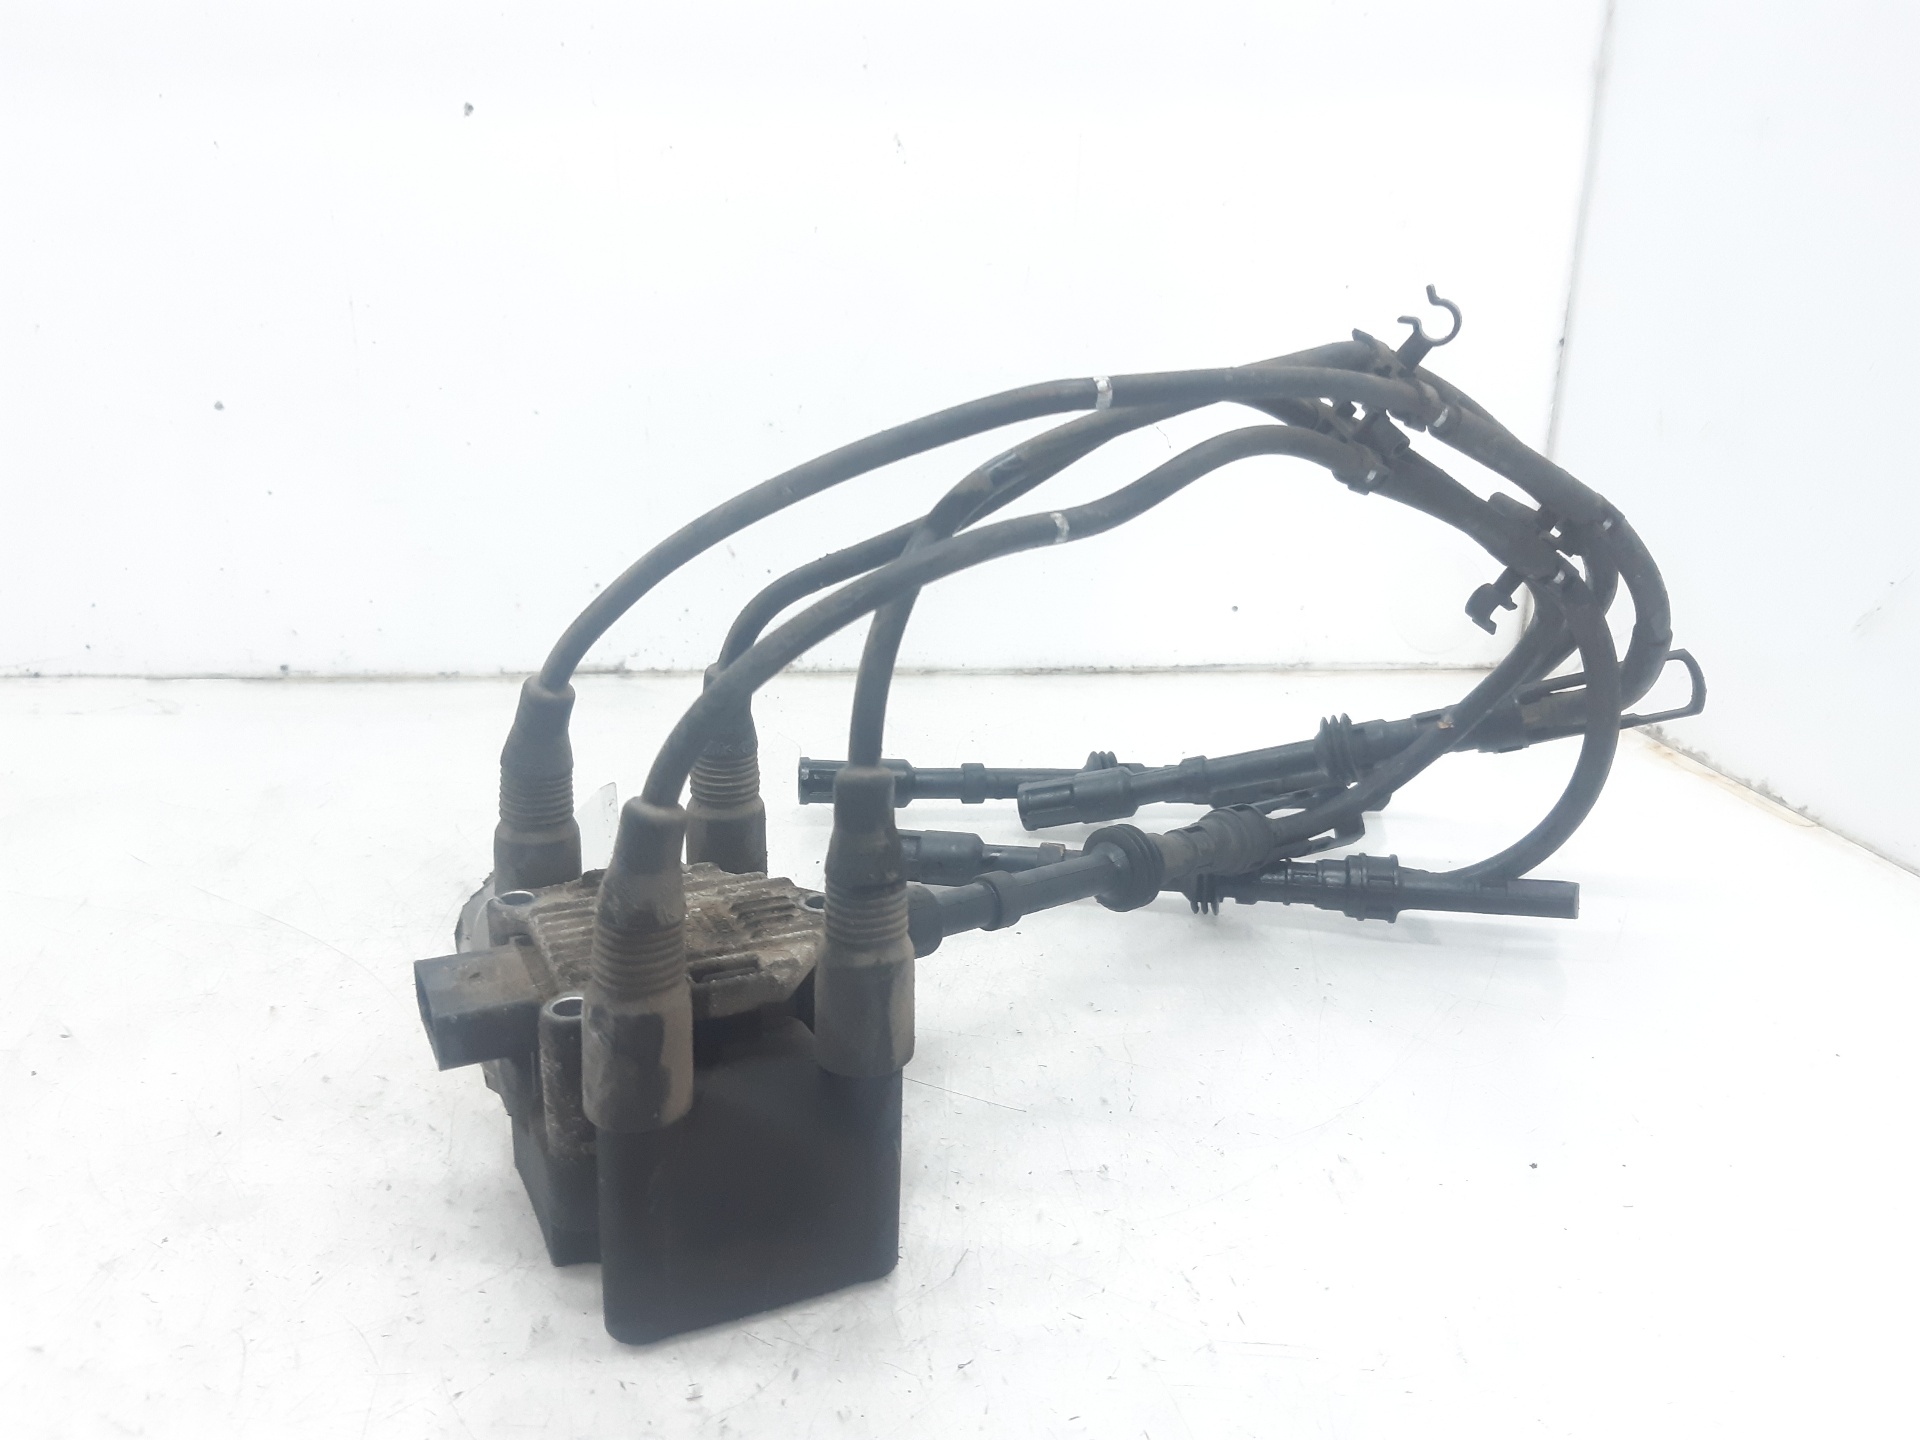 SEAT Toledo 2 generation (1999-2006) High Voltage Ignition Coil 032905106E 18658456